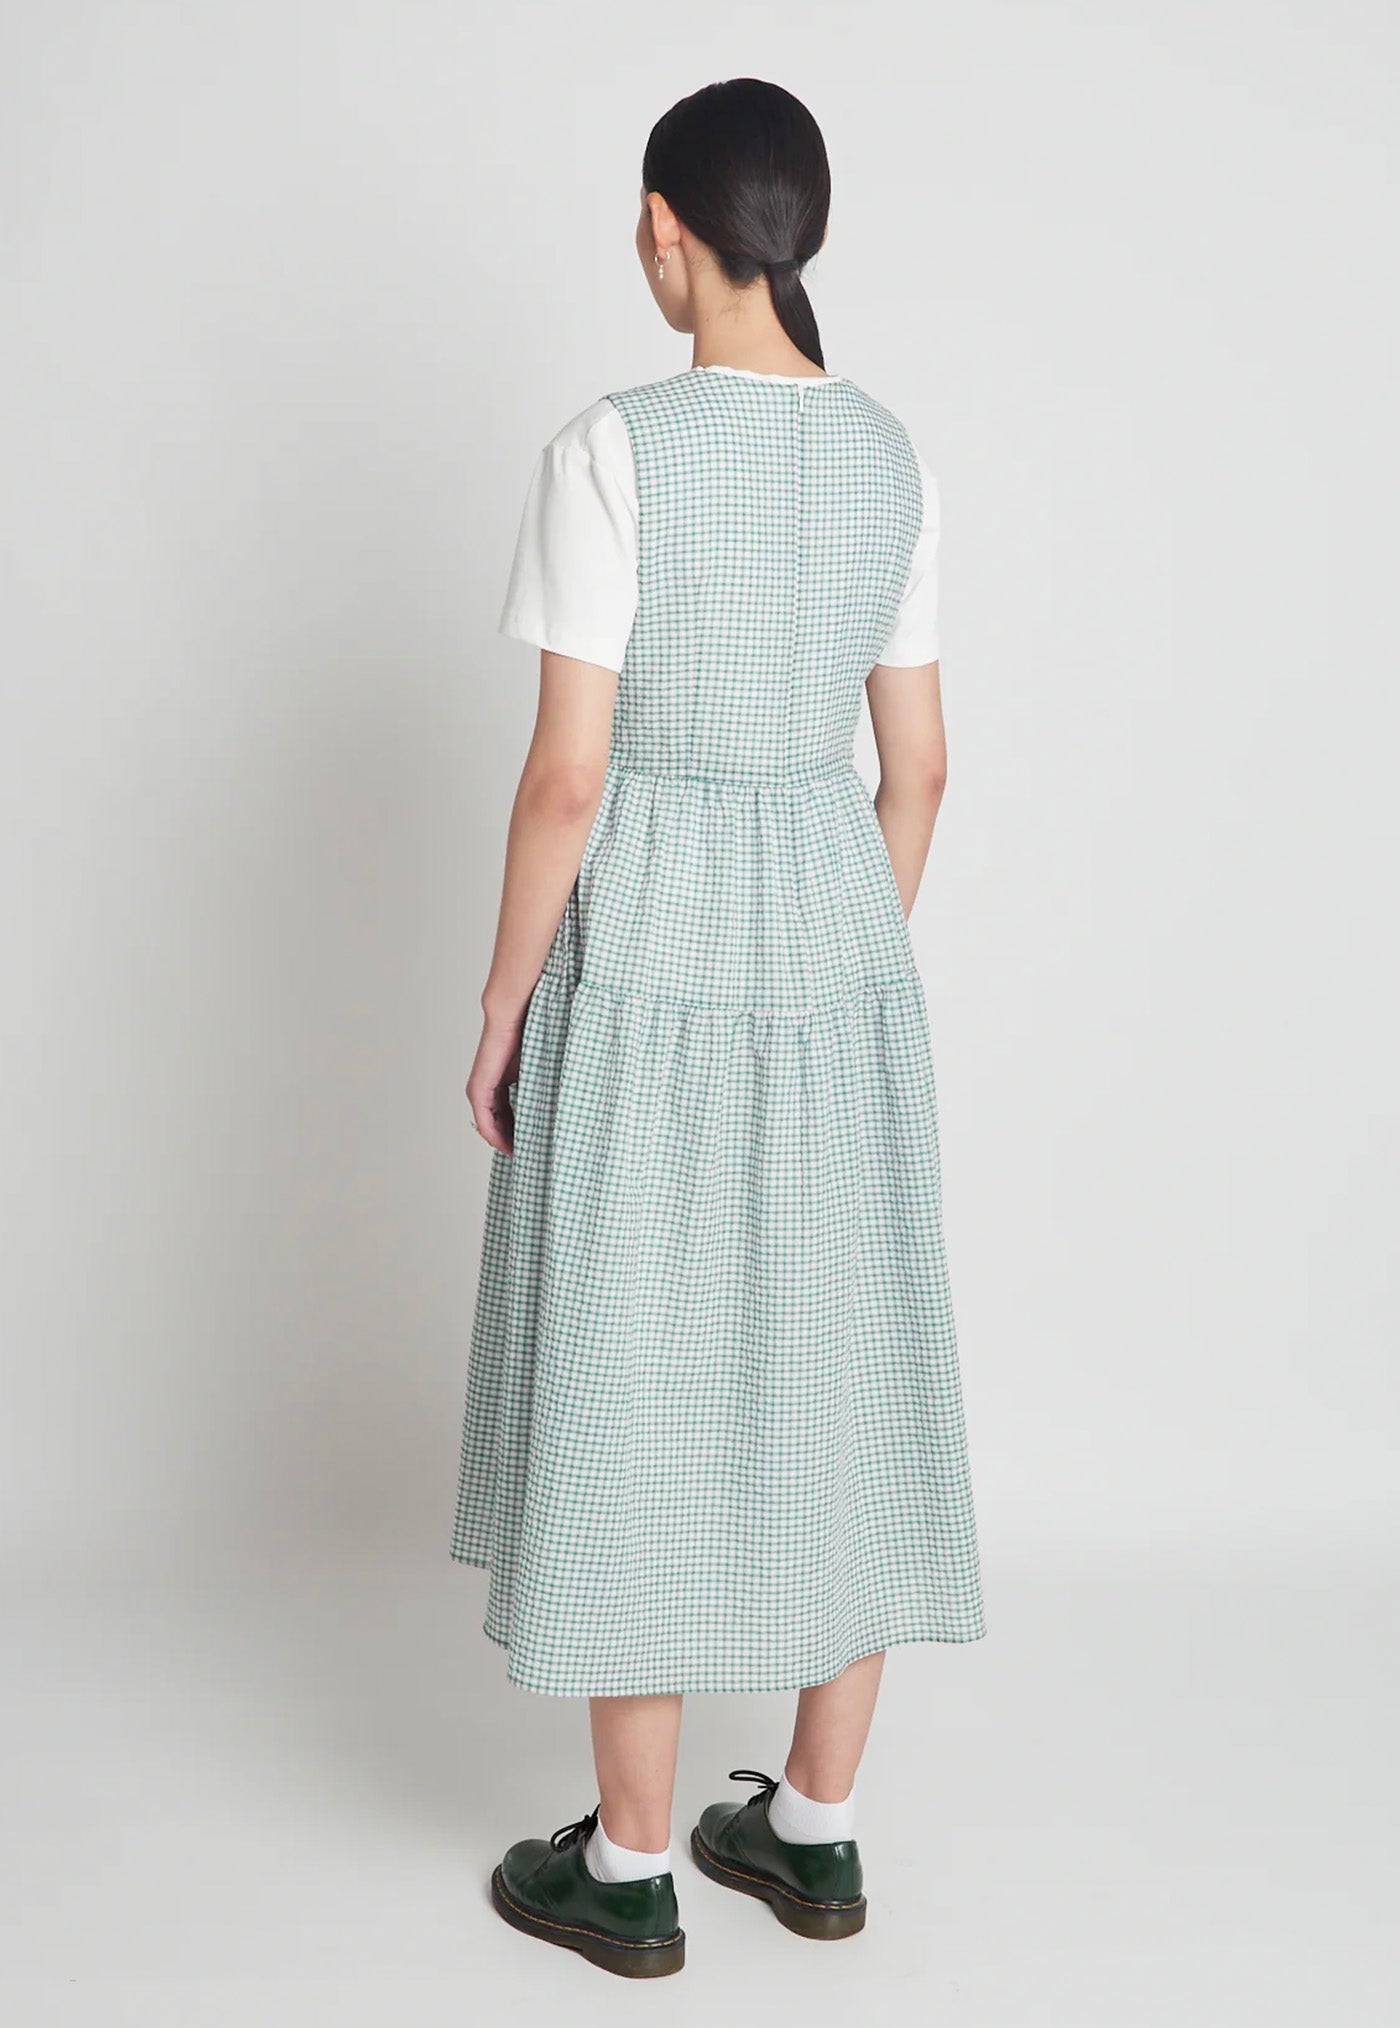 Neptune Dress - Green Gingham sold by Angel Divine